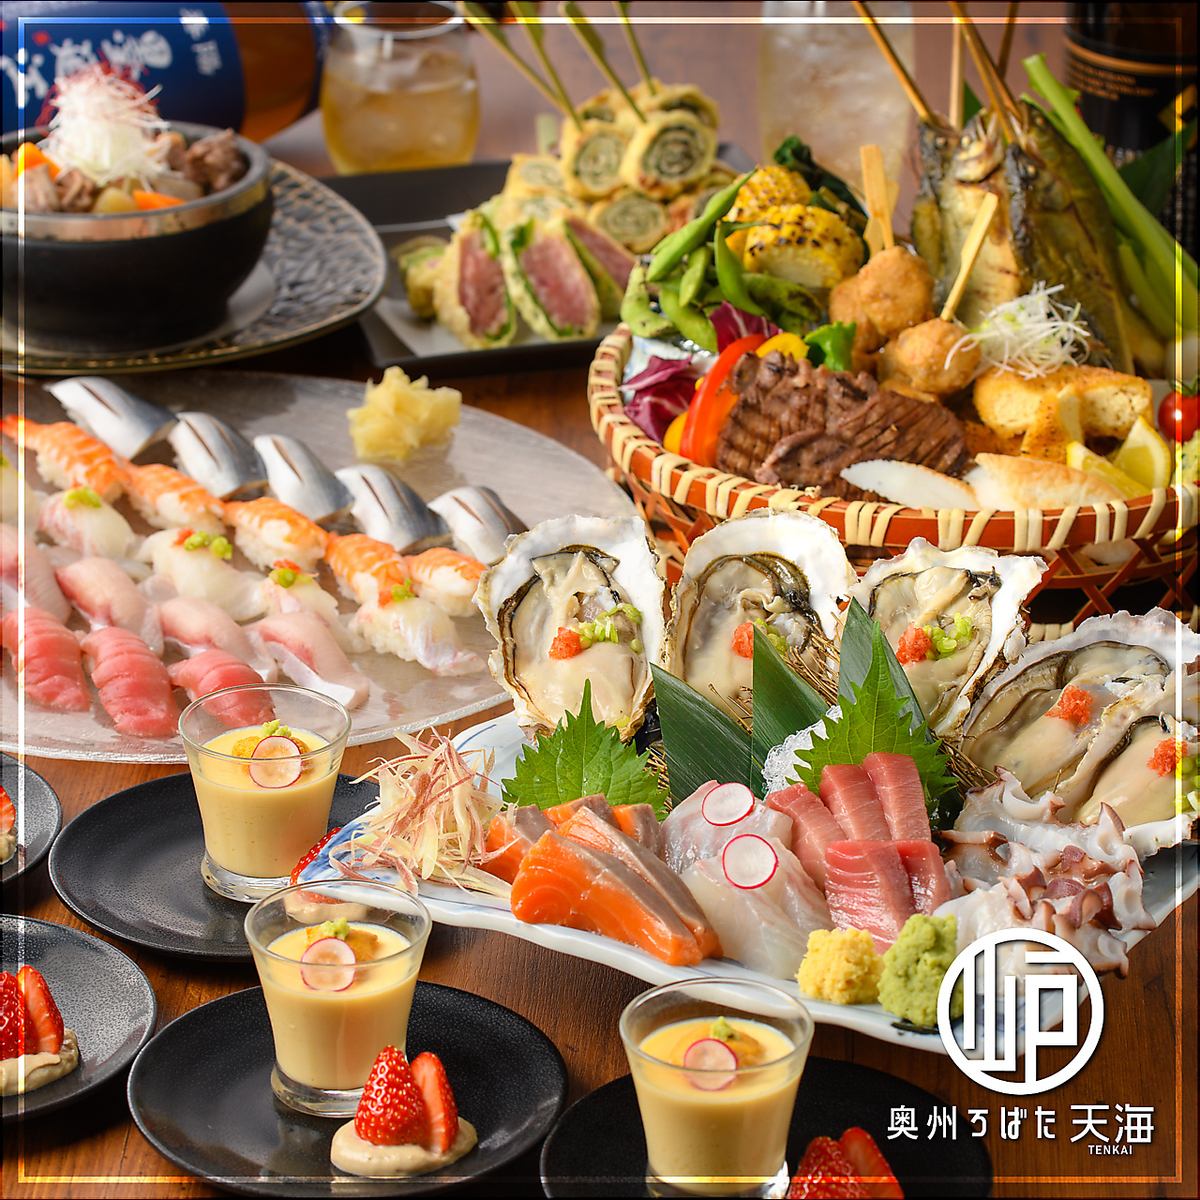 [Sanriku Enjoyment Course] 5,000 yen including 120 minutes of all-you-can-drink 8 dishes including sashimi, oysters, and sushi